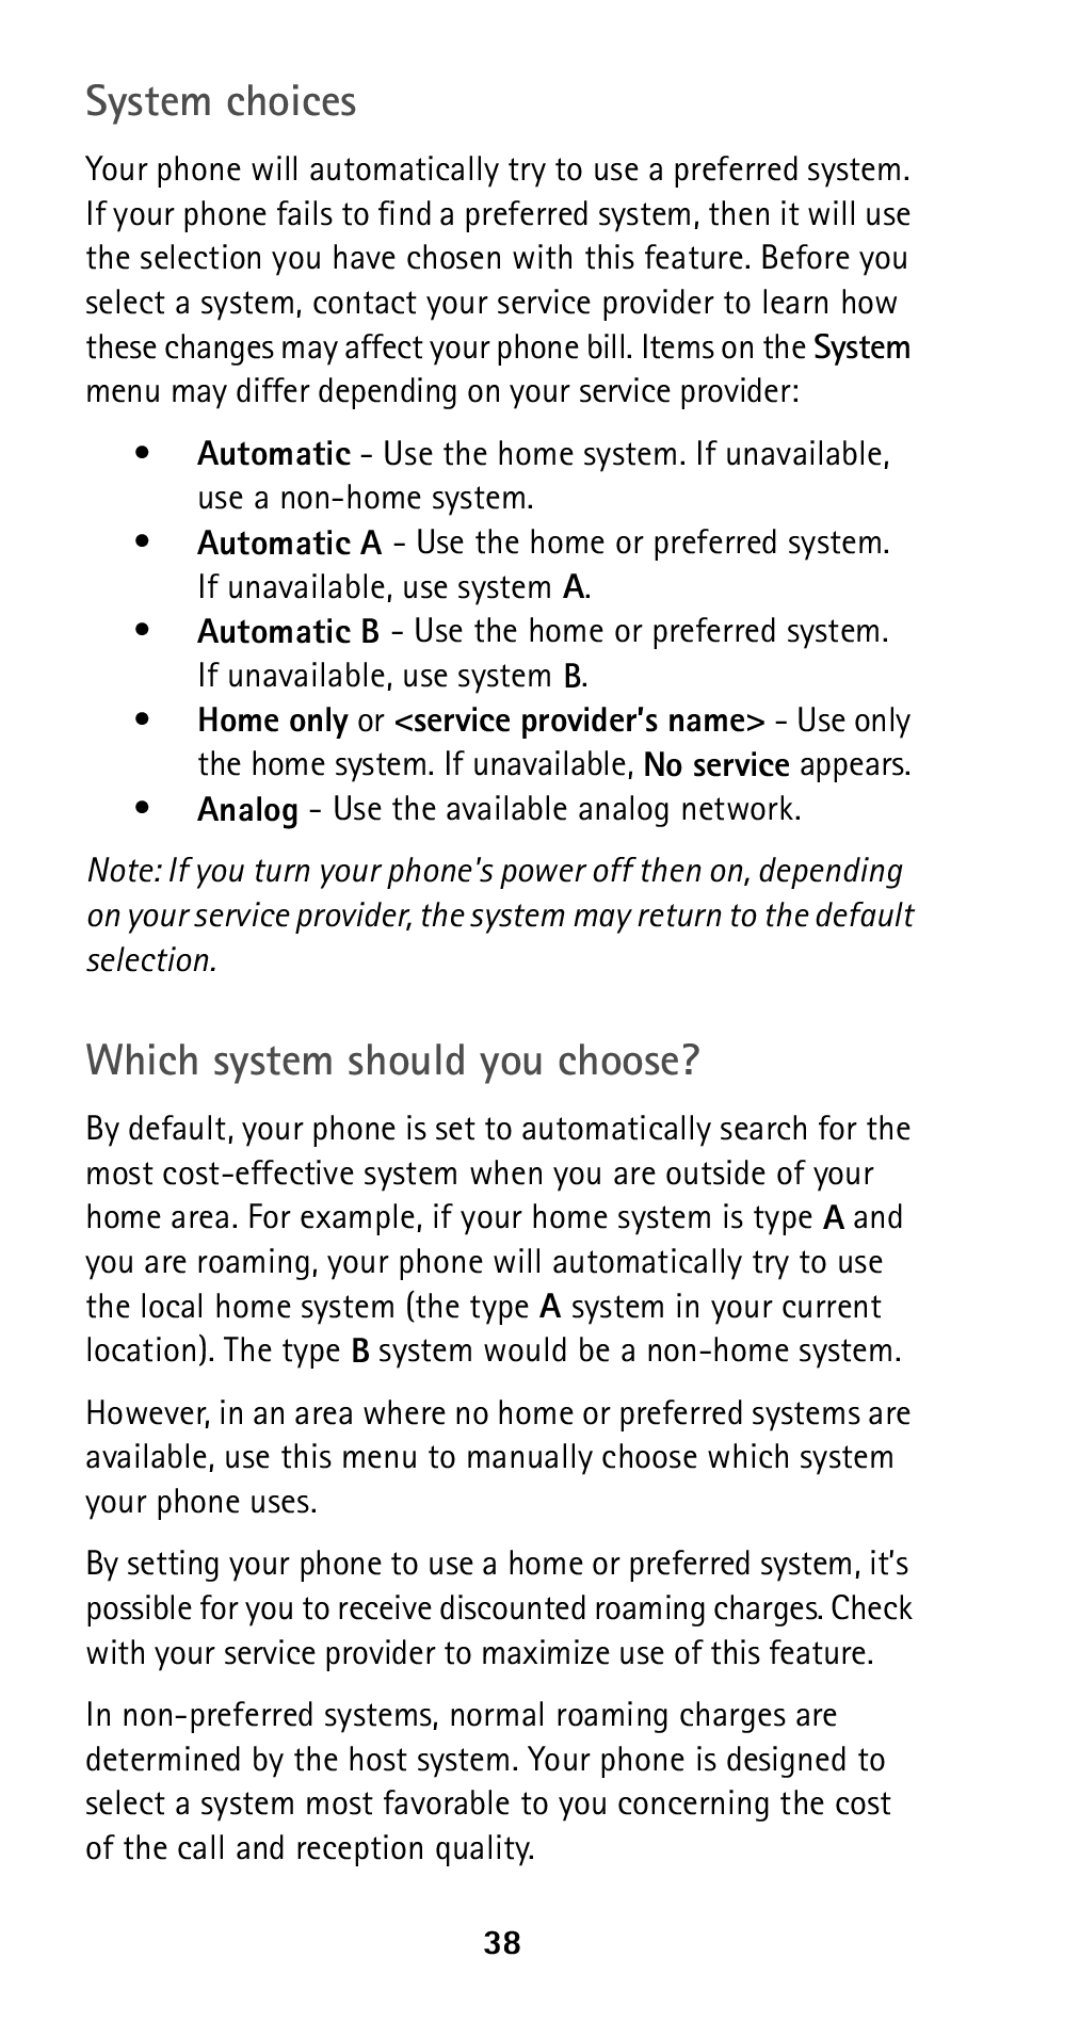 Nokia 5185i manual System choices, Which system should you choose?, Analog Use the available analog network 